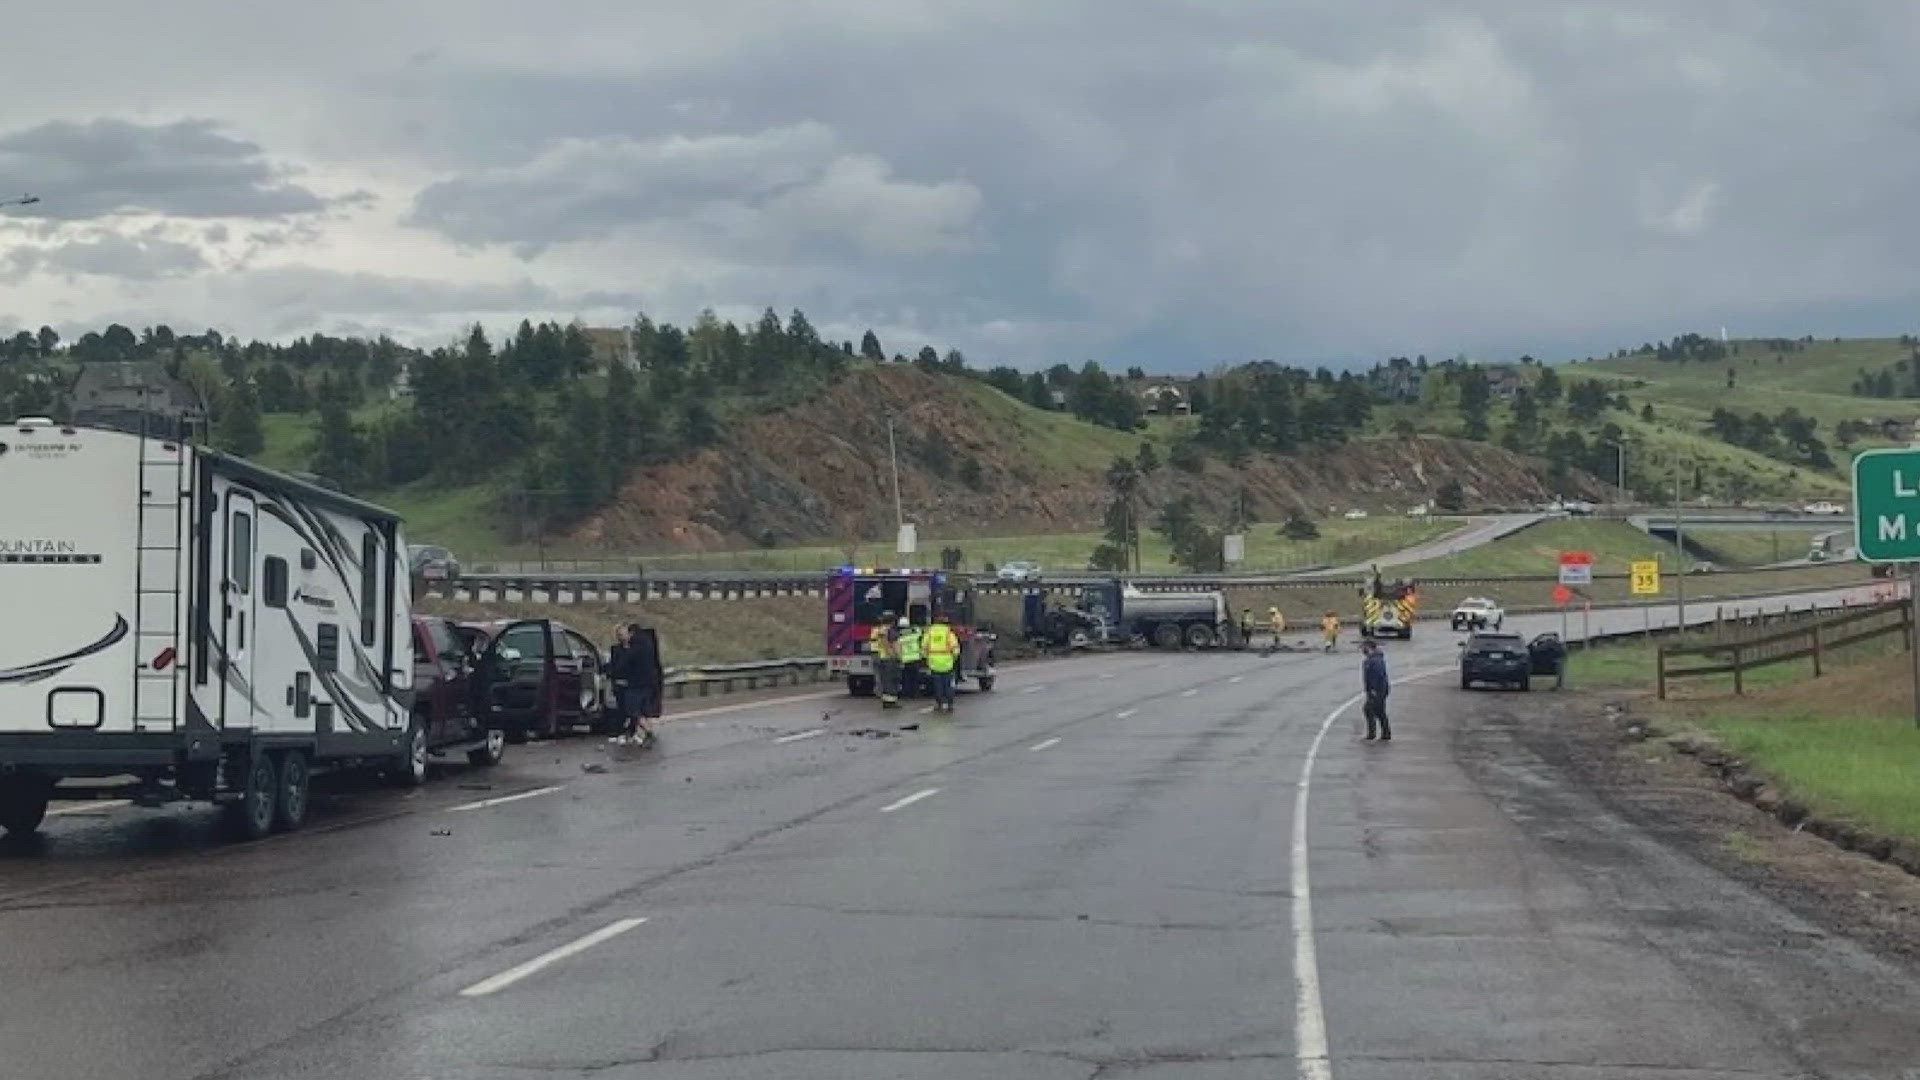 The eastbound lanes of the highway were closed Tuesday afternoon near Lookout Mountain.